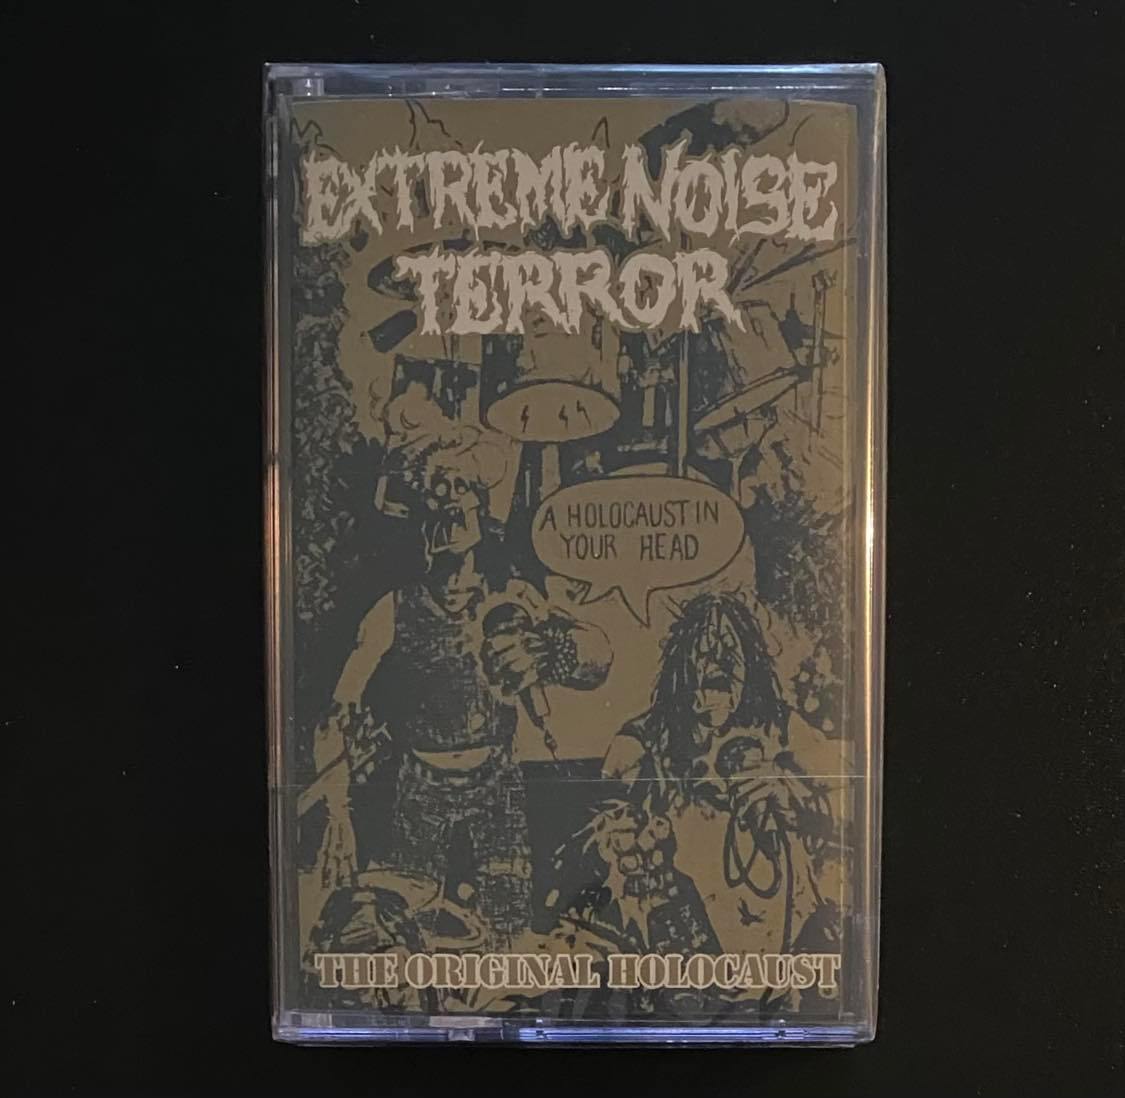 EXTREME NOISE TERROR – Holocaust in Your Head Cassette